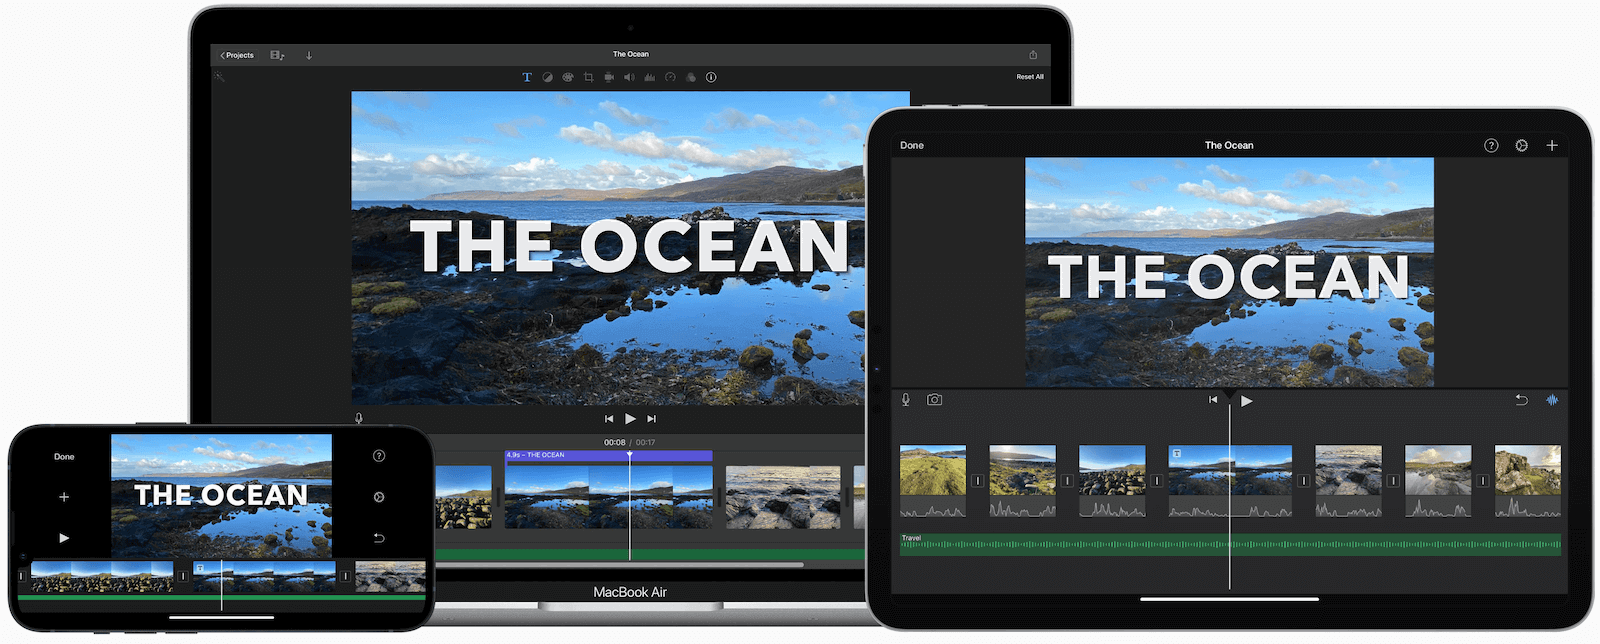 Best Video Editing Software for Mac - iMovie